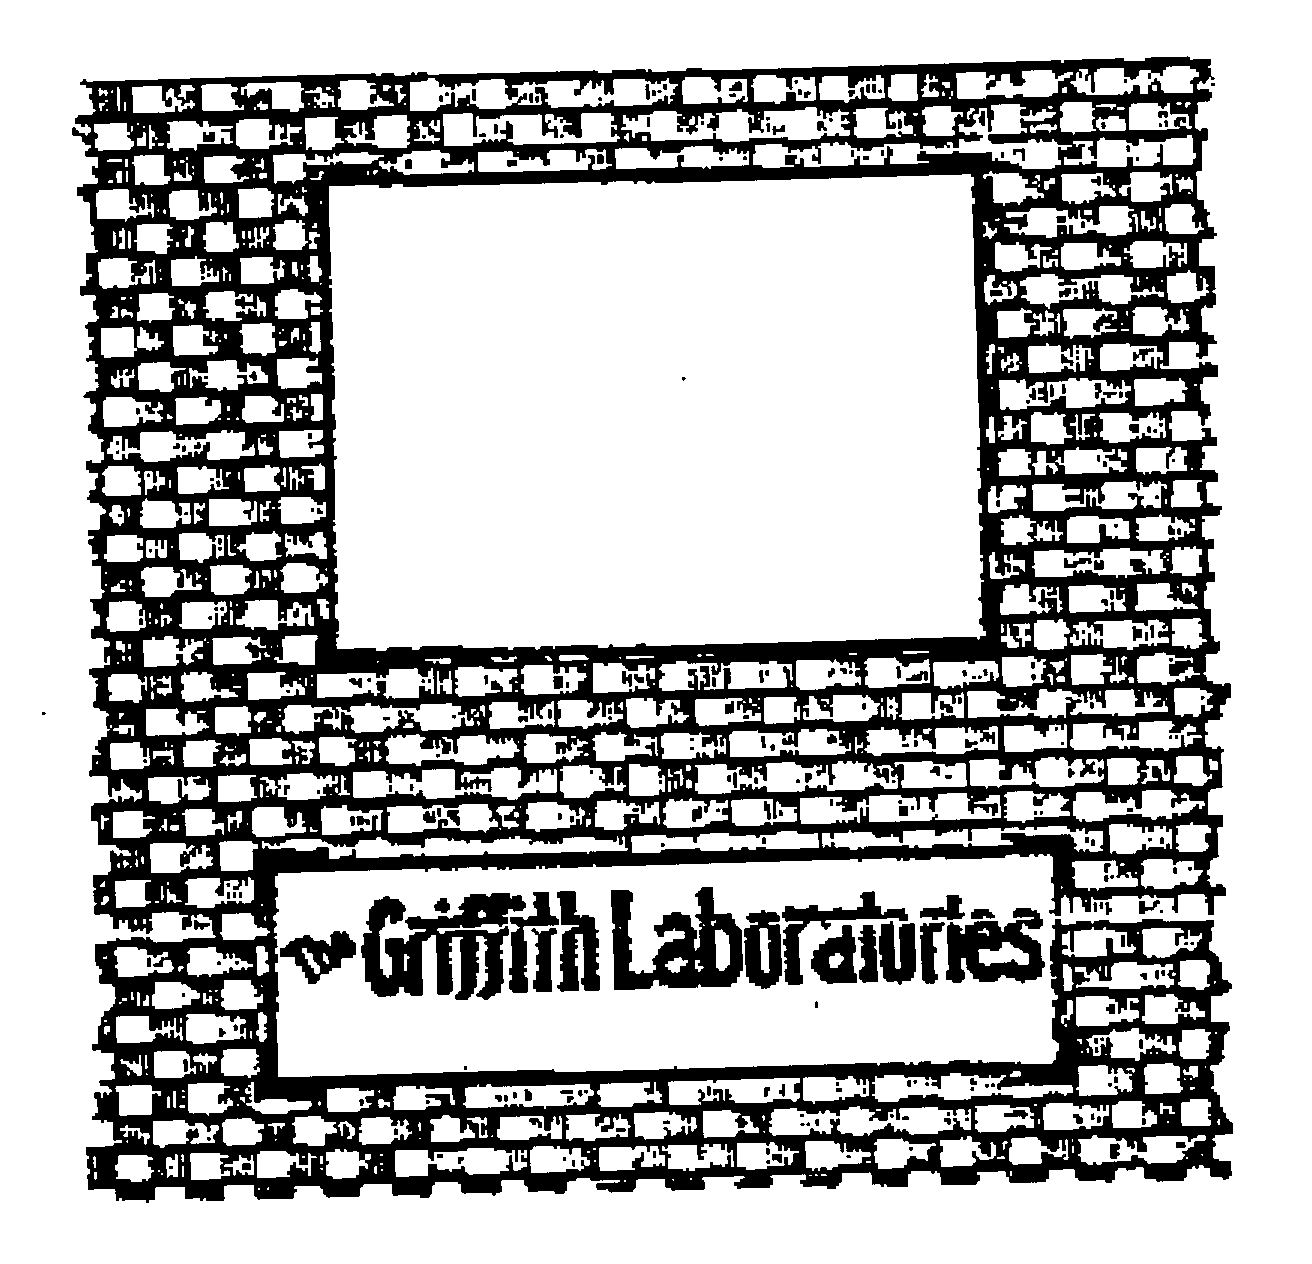  THE GRIFFITH LABORATORIES